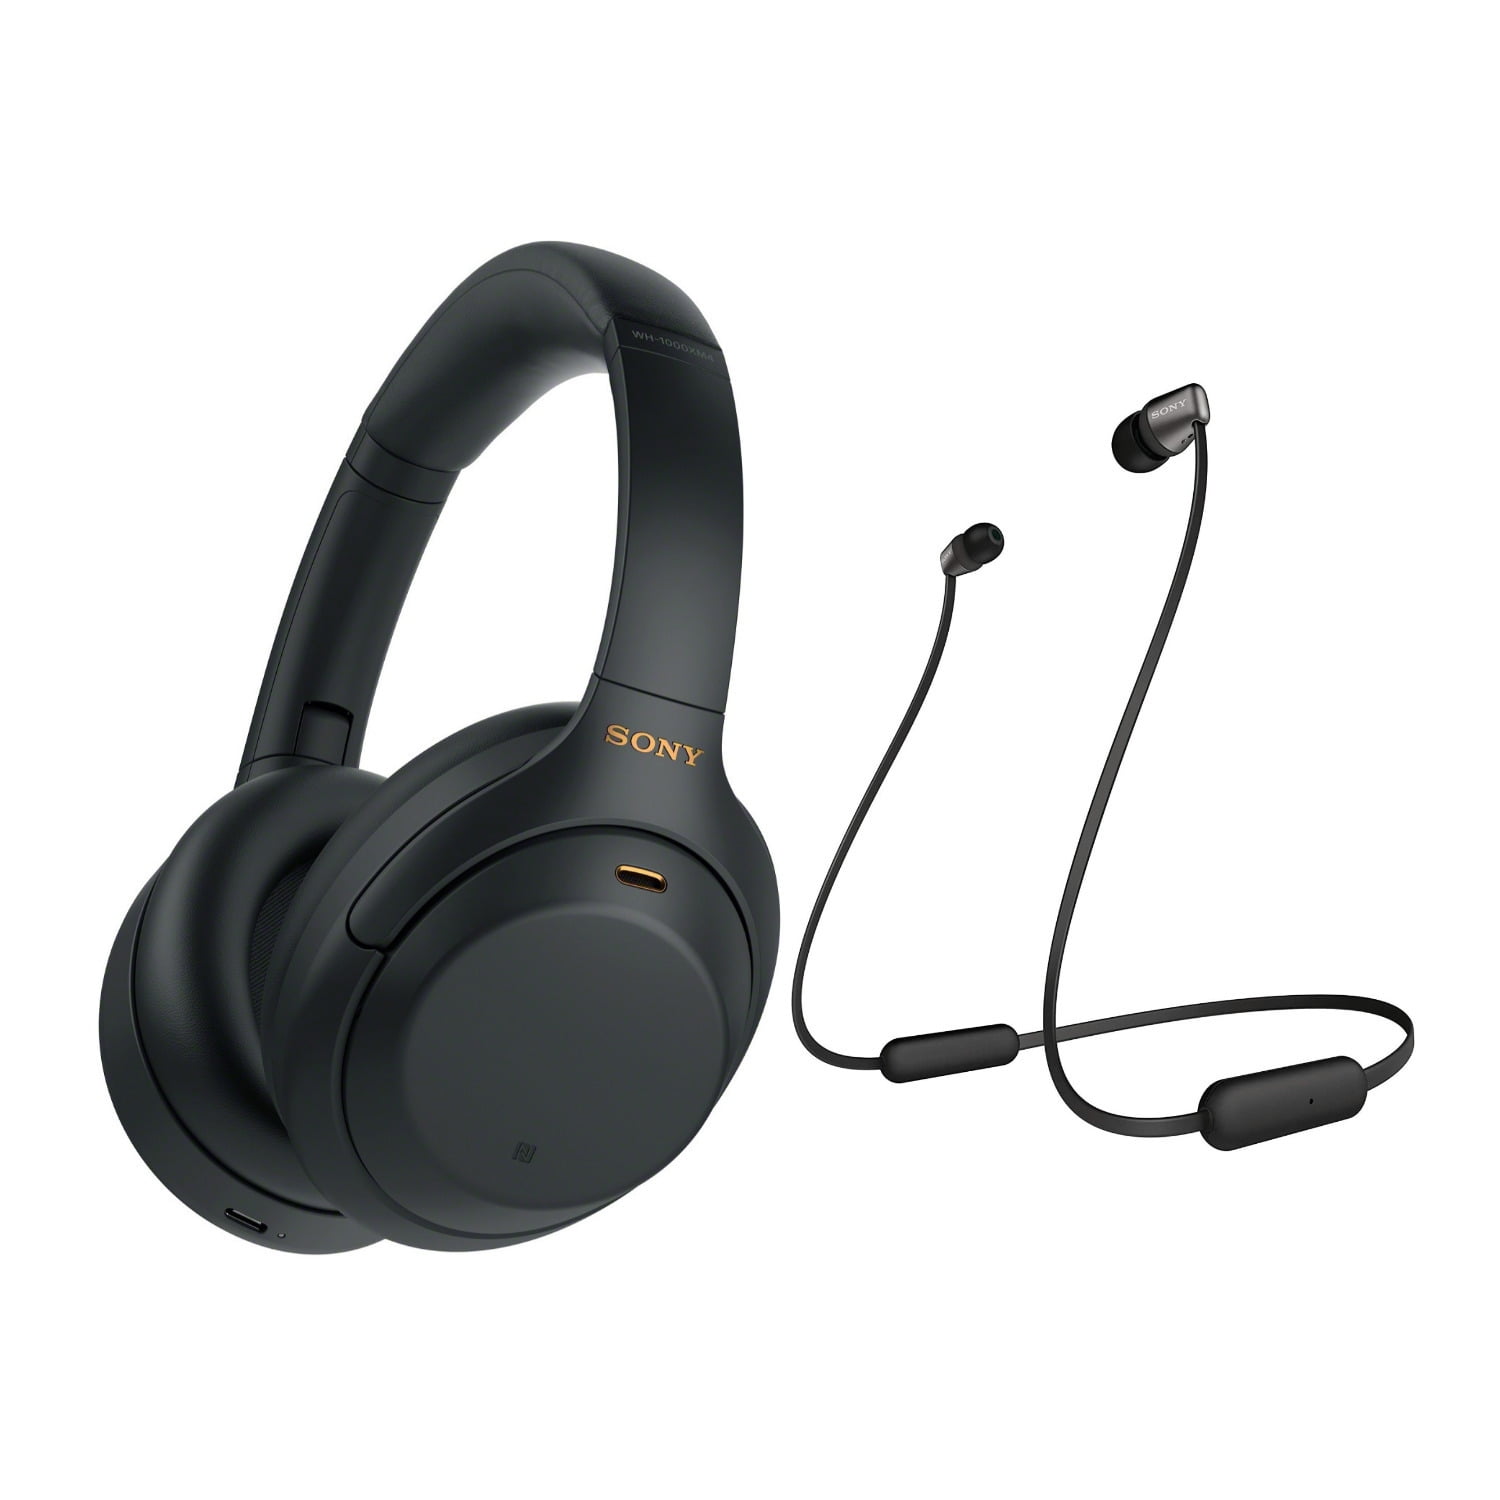 Sony WH1000XM5/B Wireless Noise Canceling Headphones (Black) Bundle with  Deco Gear Hard Case + Pro Audio Headphone Stand + Microfiber Cleaning Cloth